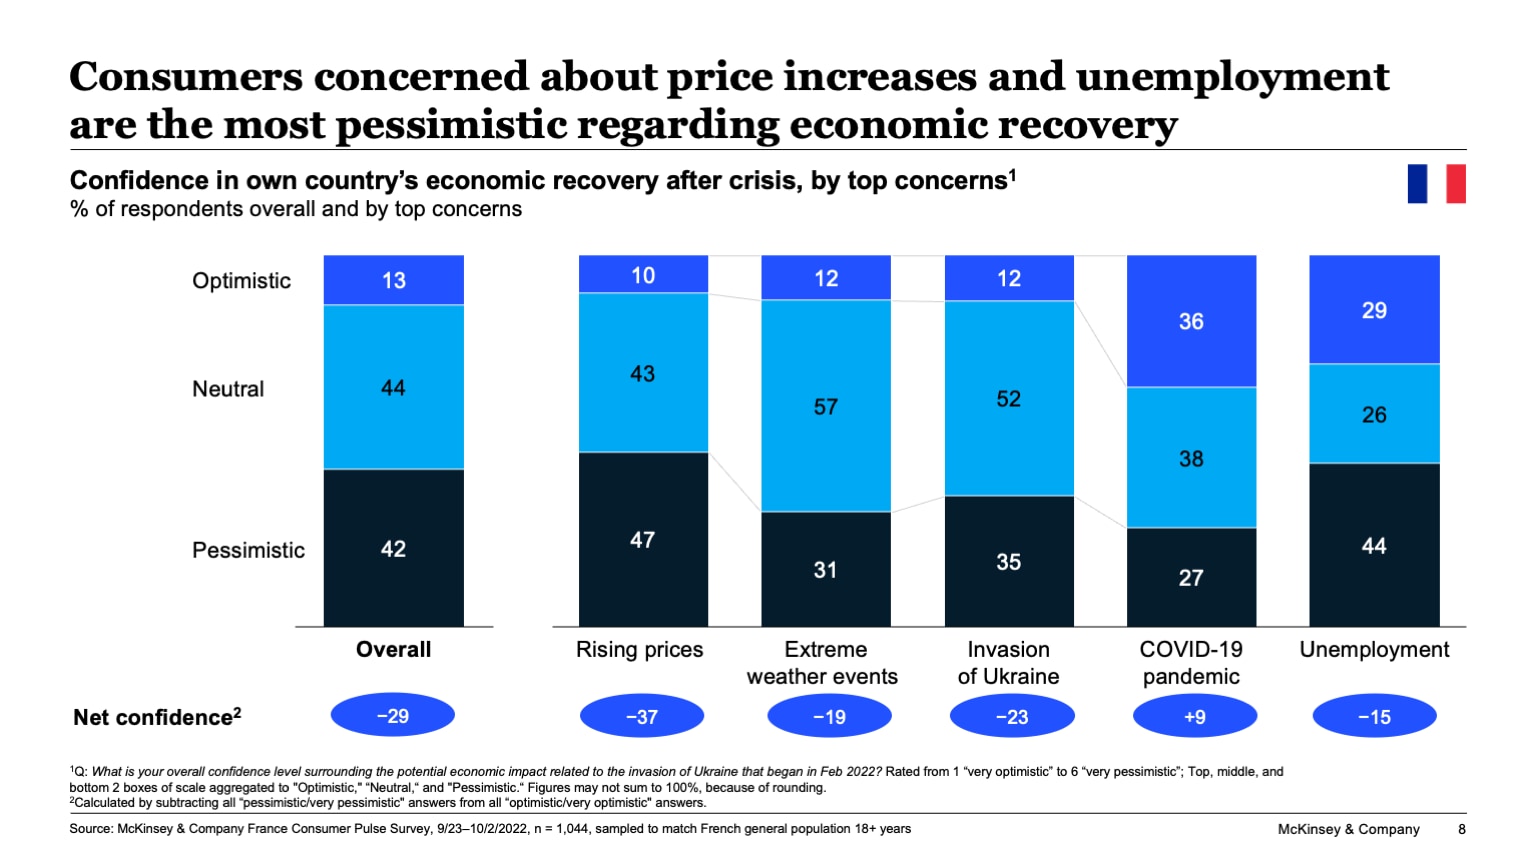 Consumers concerned about price increases and unemployment are the most pessimistic regarding economic recovery